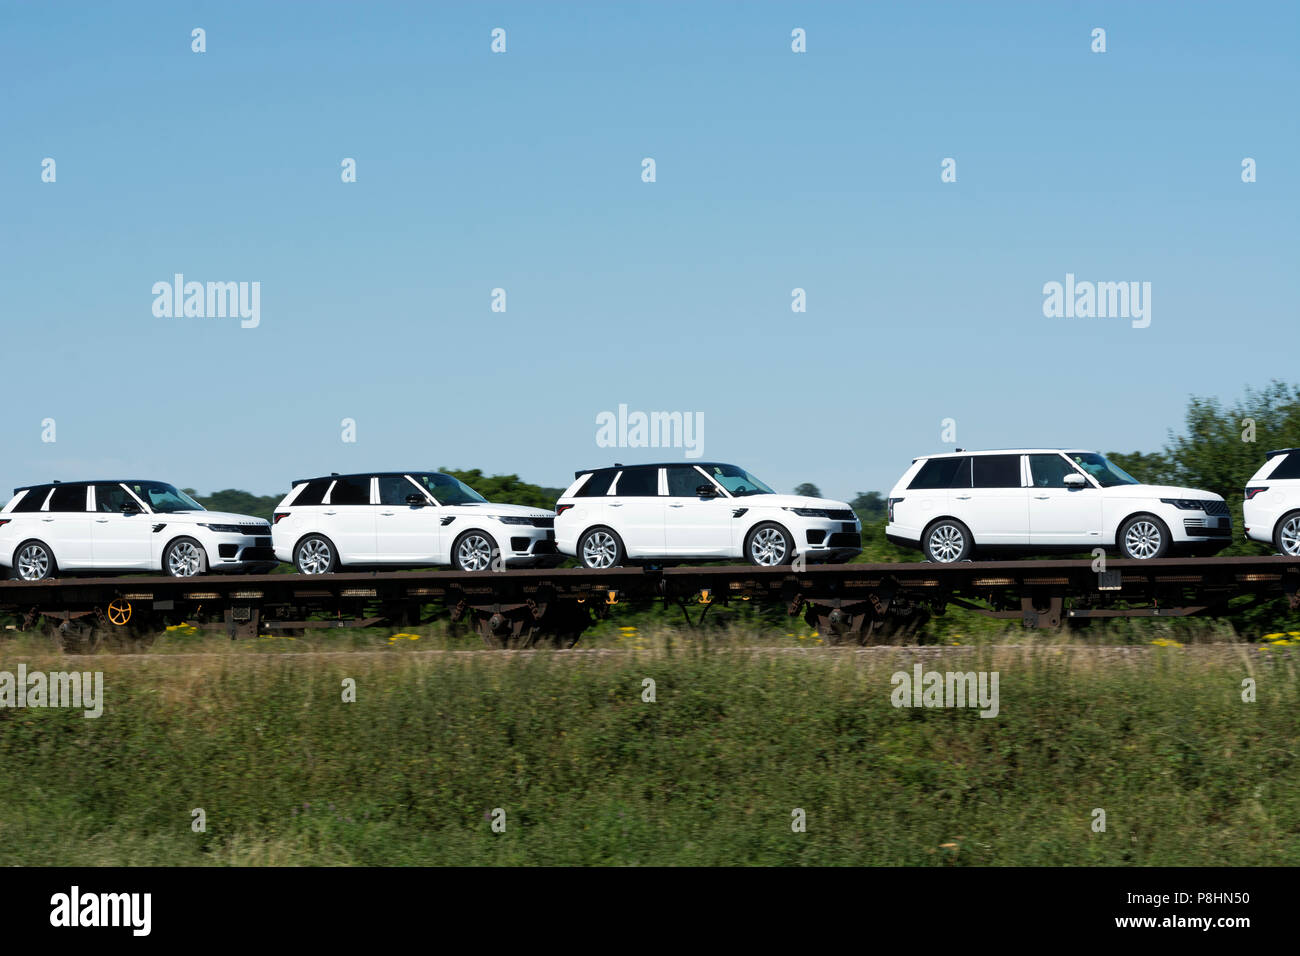 New Land Rover cars transported by rail, Warwickshire, UK Stock Photo